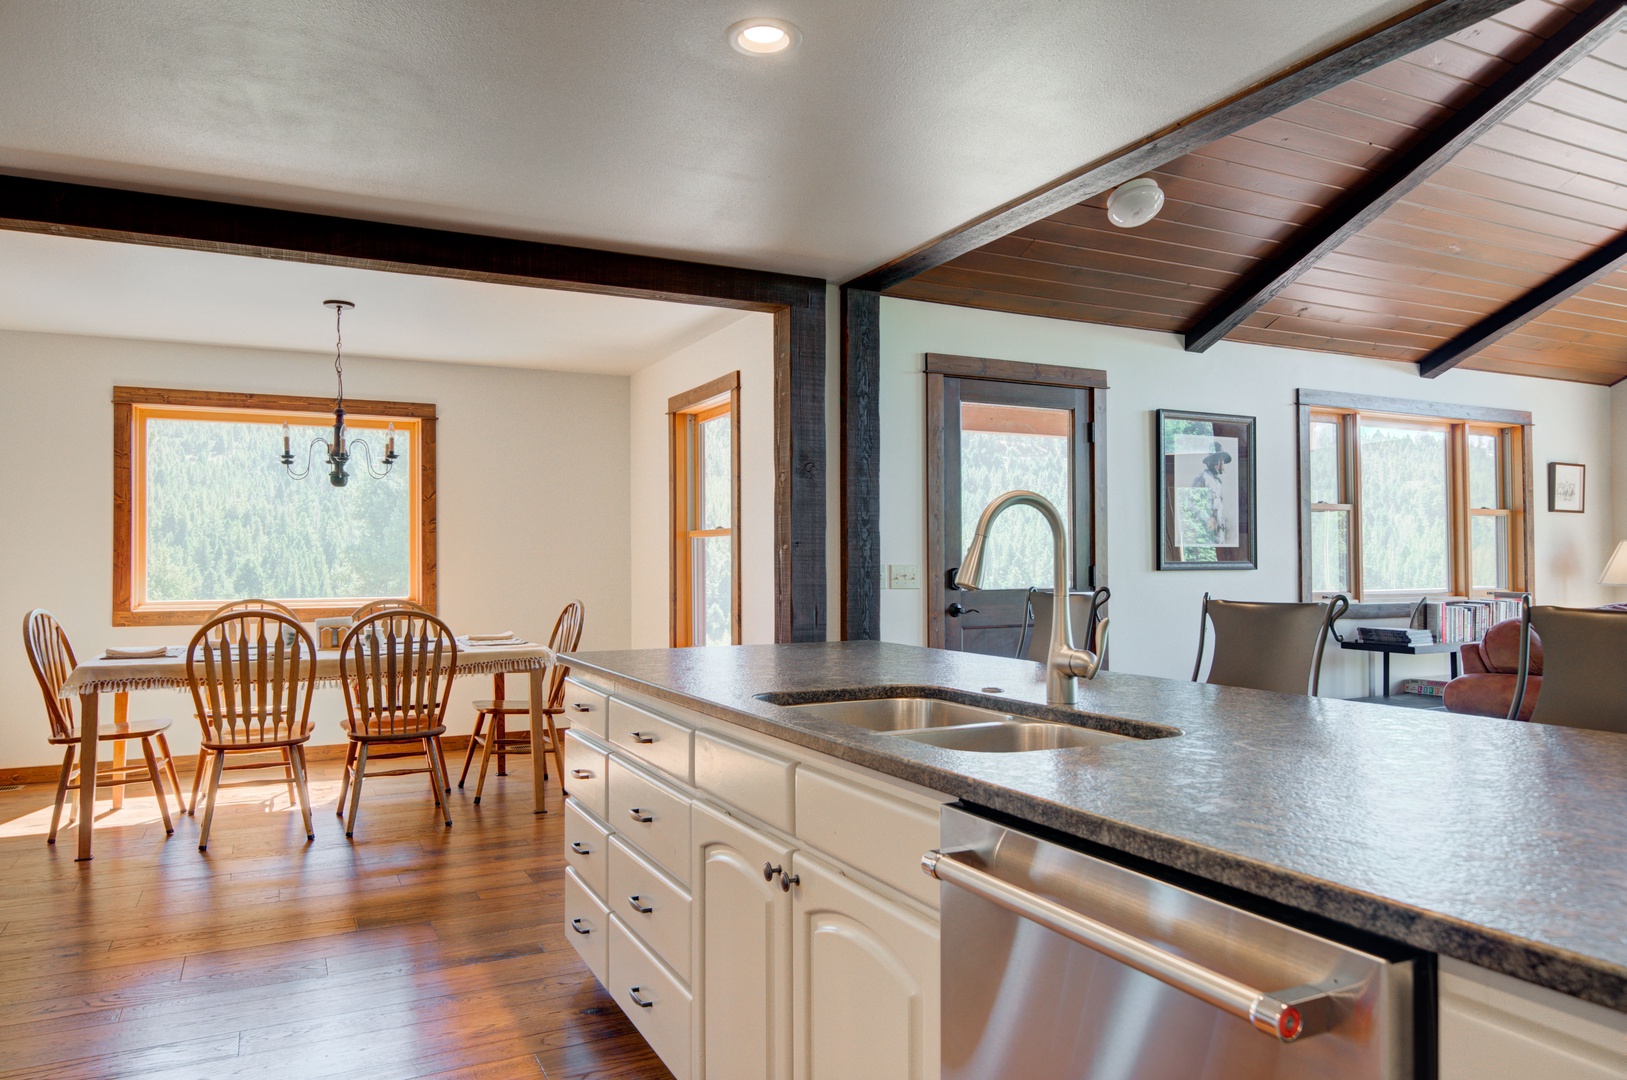 Bozeman Vacation Rentals, The Canyon Lookout - Kitchen and dining areas